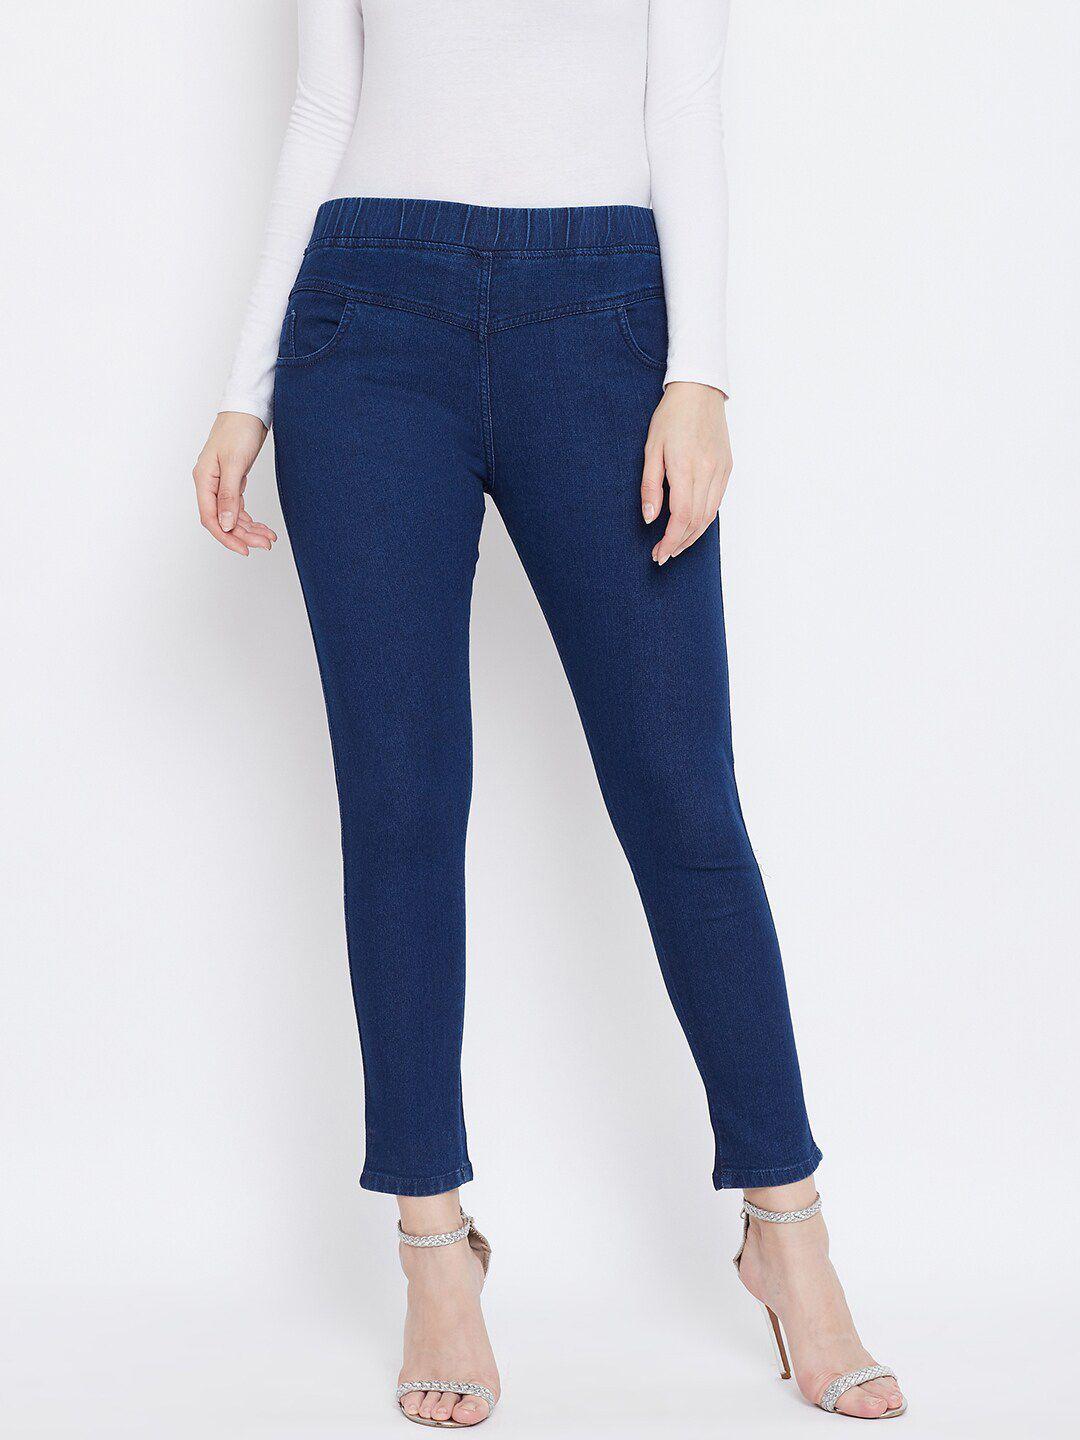 clora-creation-women-navy-blue-solid-cotton-jeggings